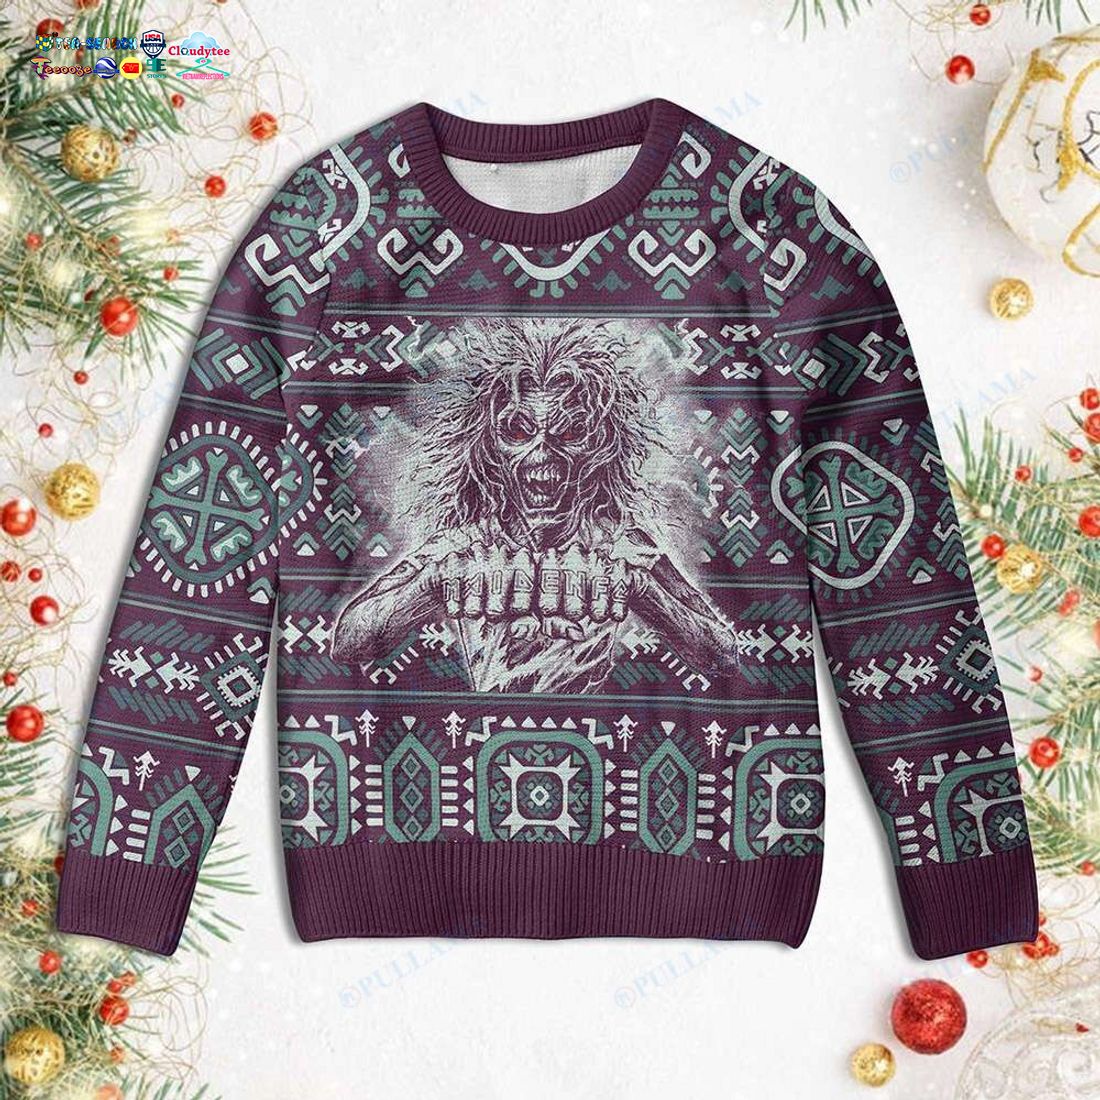 Pullama Iron Maiden Ver 1 Ugly Christmas Sweater - Rejuvenating picture